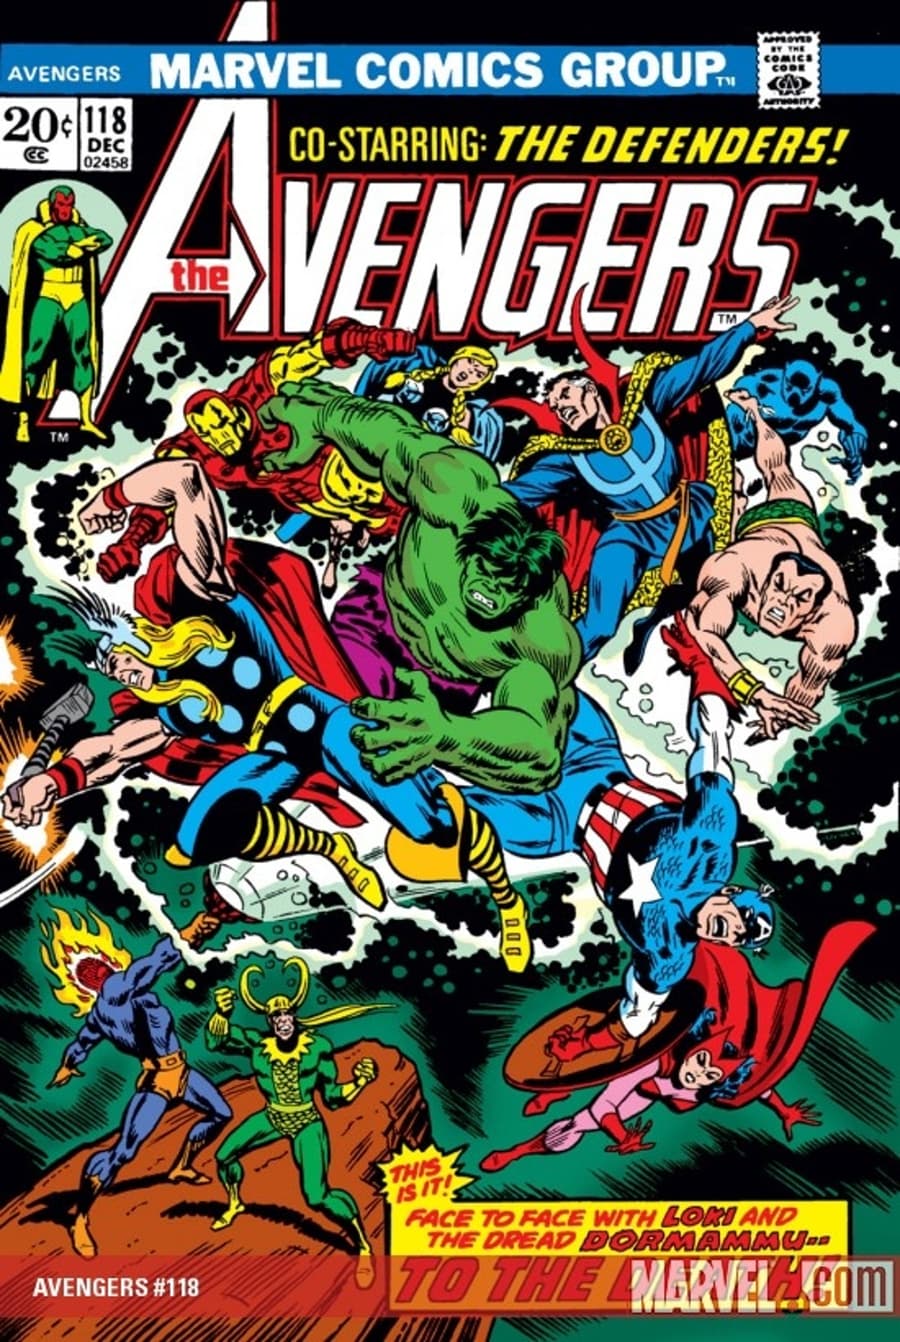 AVENGERS (1963) #118 cover by Bob Brown